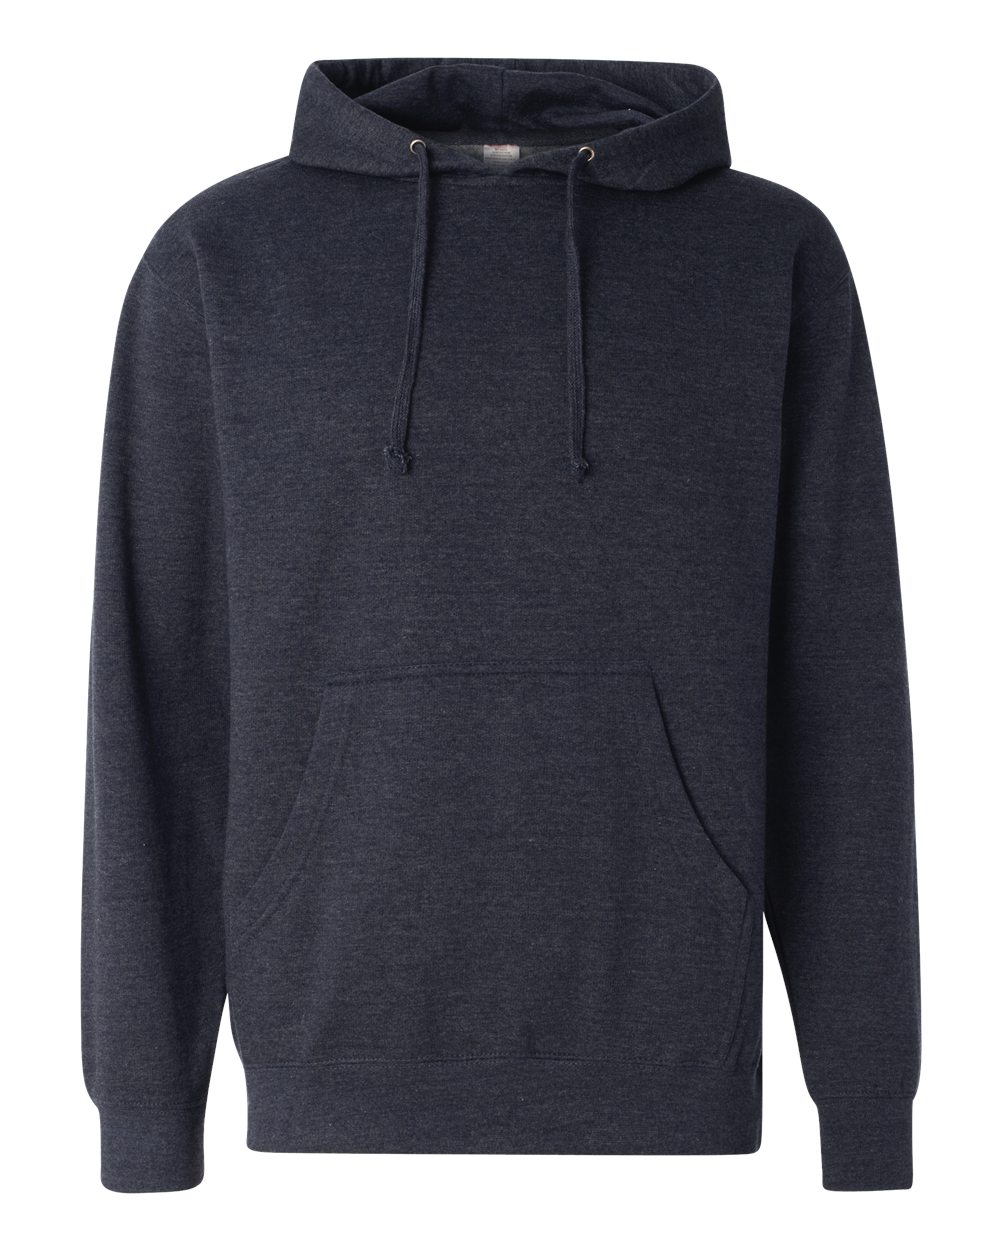 click to view Navy Heather